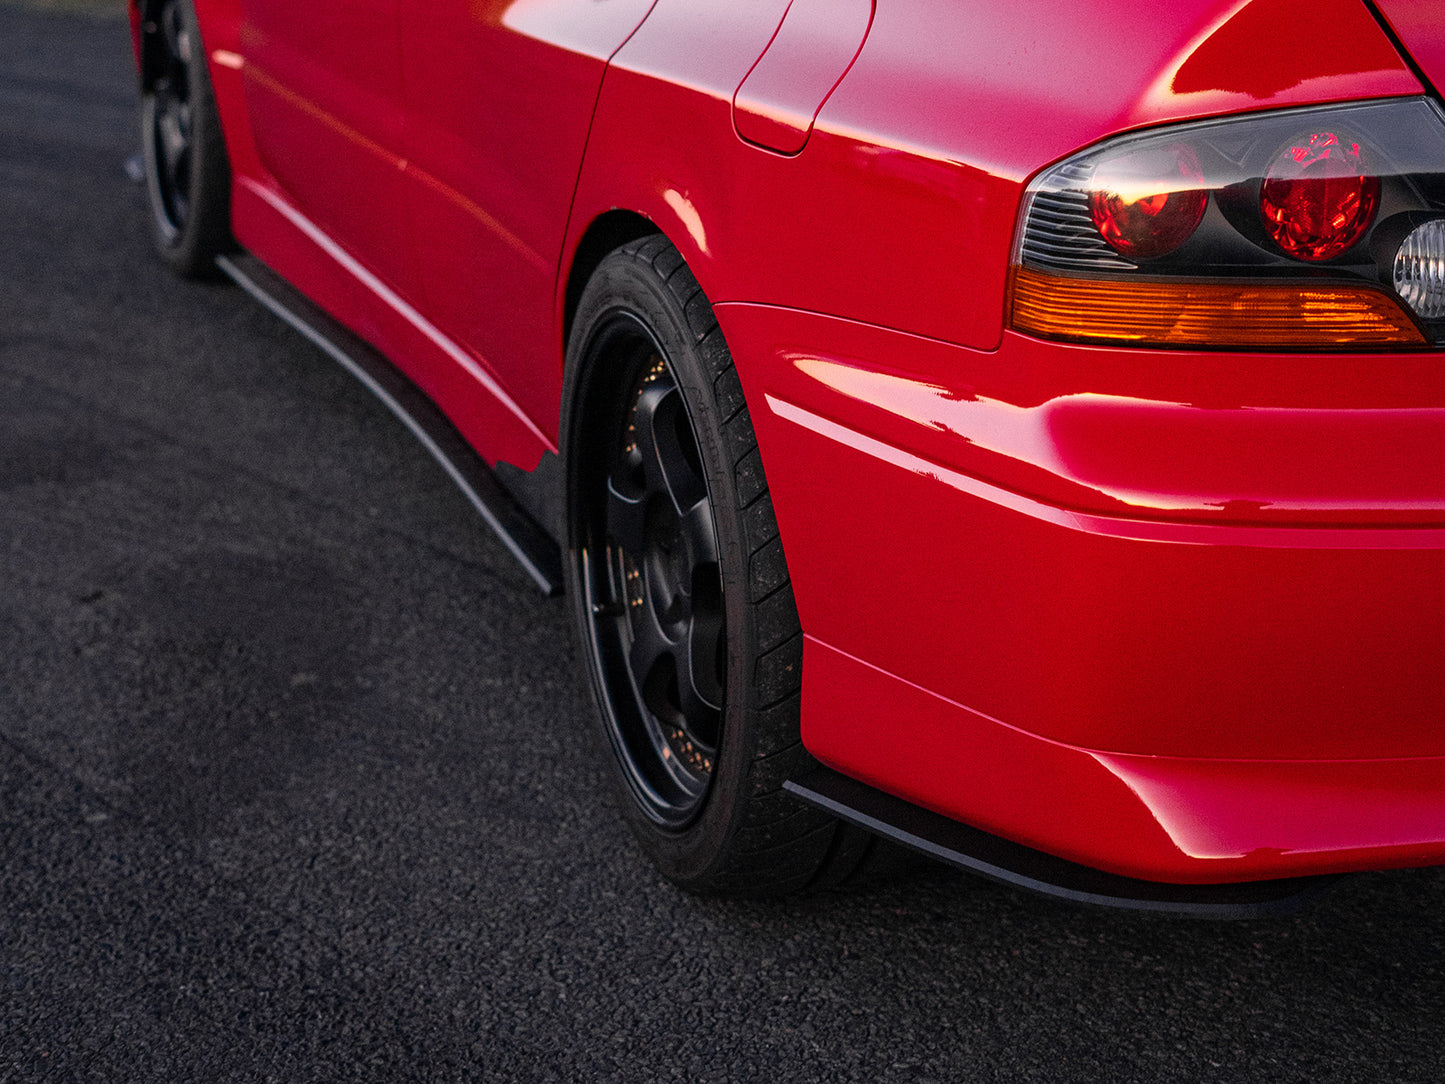 The Project Aero Mitsubishi Evo 8 rear spats/pods are a great addition to the OEM rear bumper bar